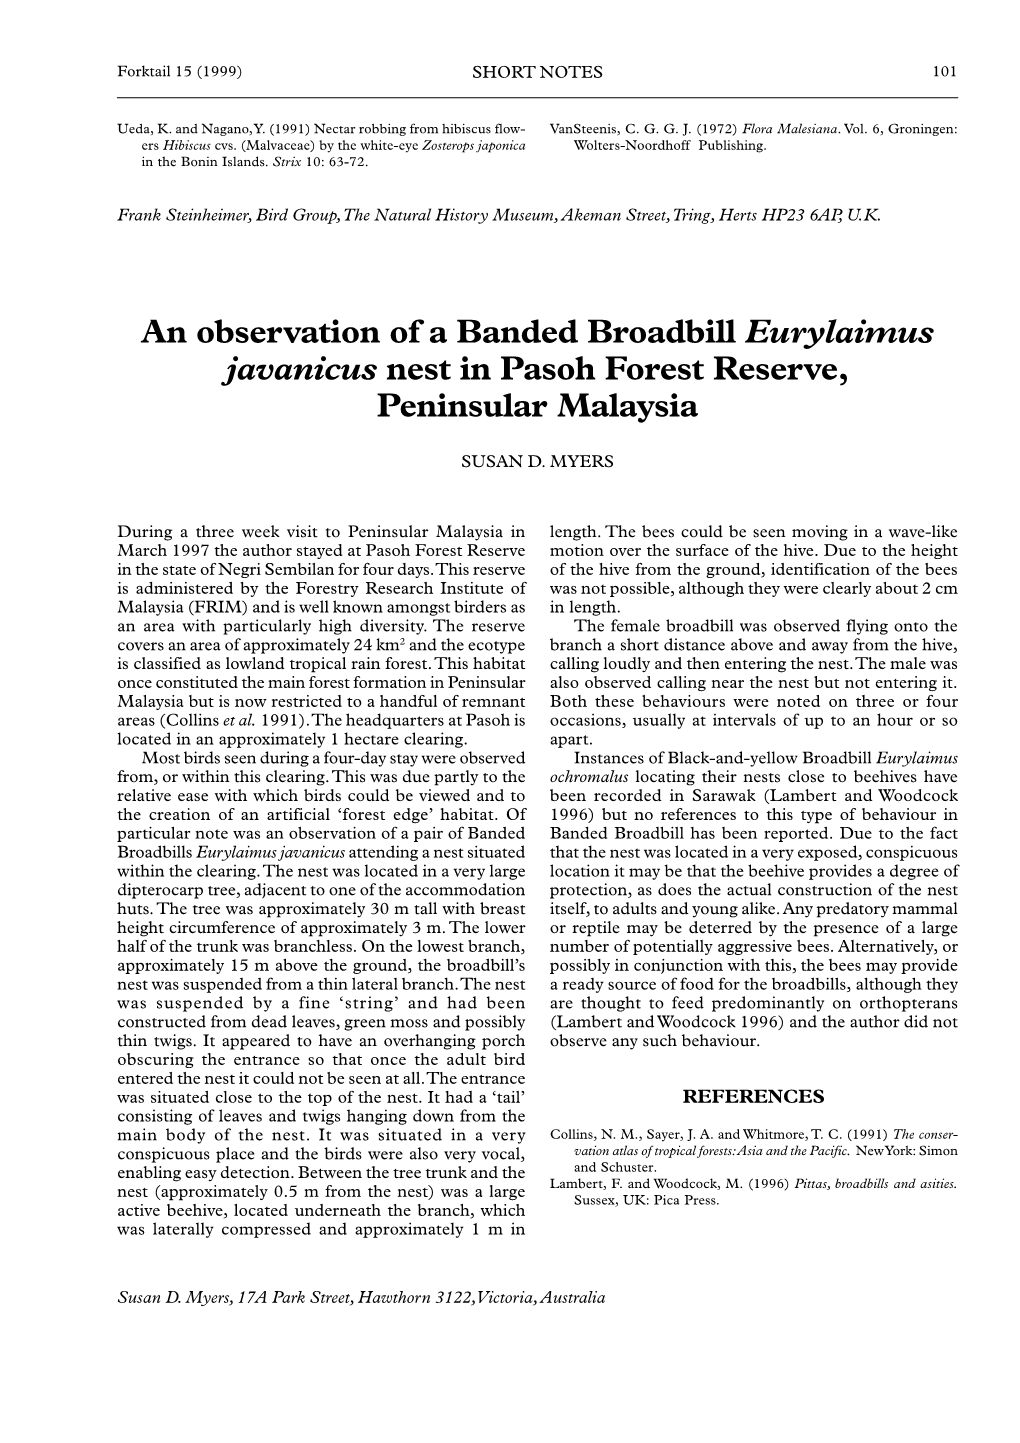 An Observation of a Banded Broadbill Eurylaimus Javanicus Nest in Pasoh Forest Reserve, Peninsular Malaysia